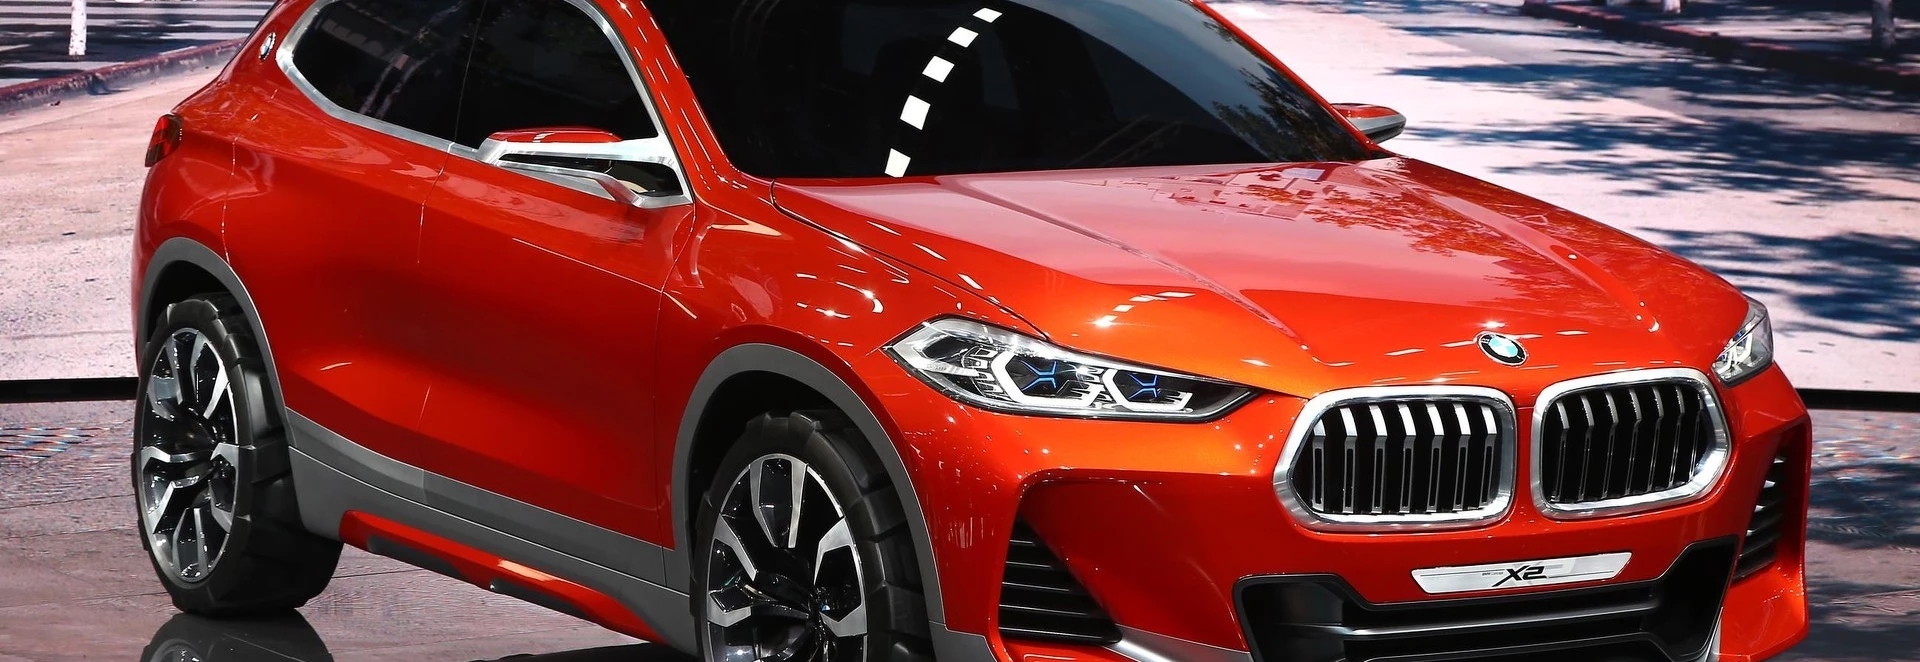 Check out the BMW X2 concept